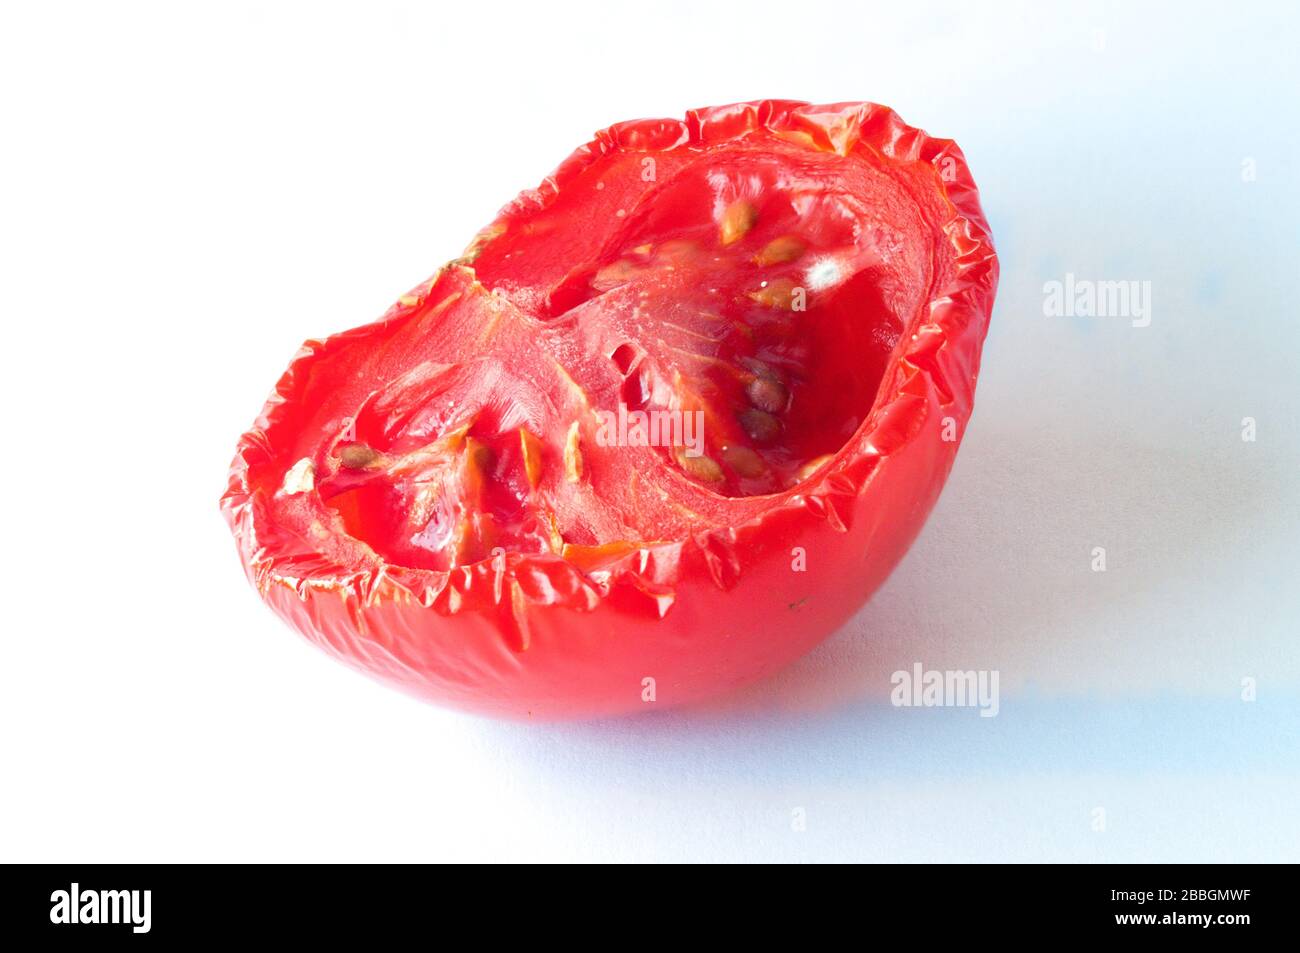 Half of a rotten tomato with the beginning of mould growth. Stock Photo